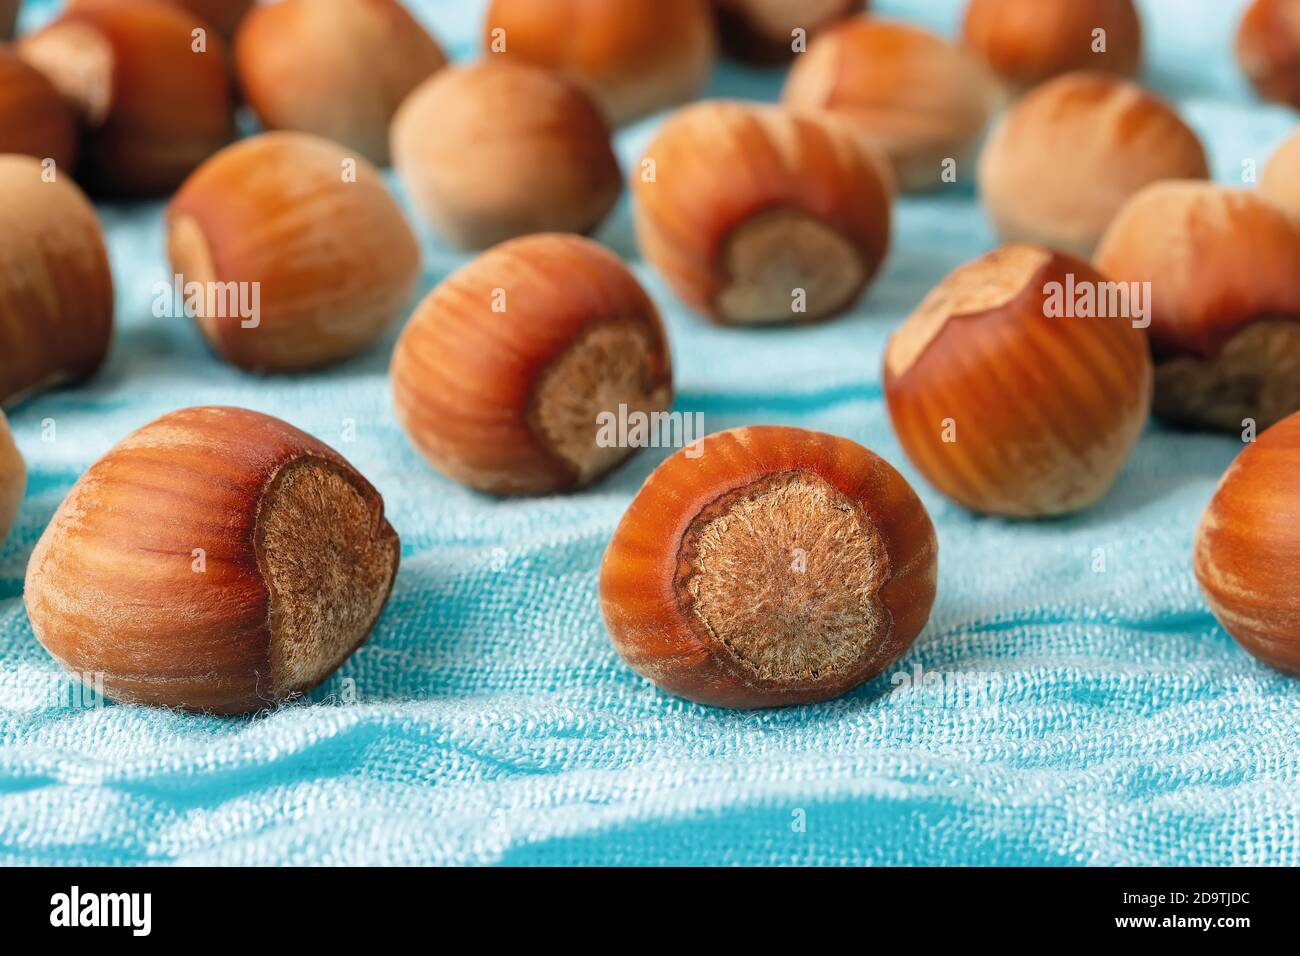 Whole unpeeled hazelnuts scattered on a turquoise textile background. Nuts as an antioxidant and protein source for ketogenic diet and vegetarianism. Stock Photo